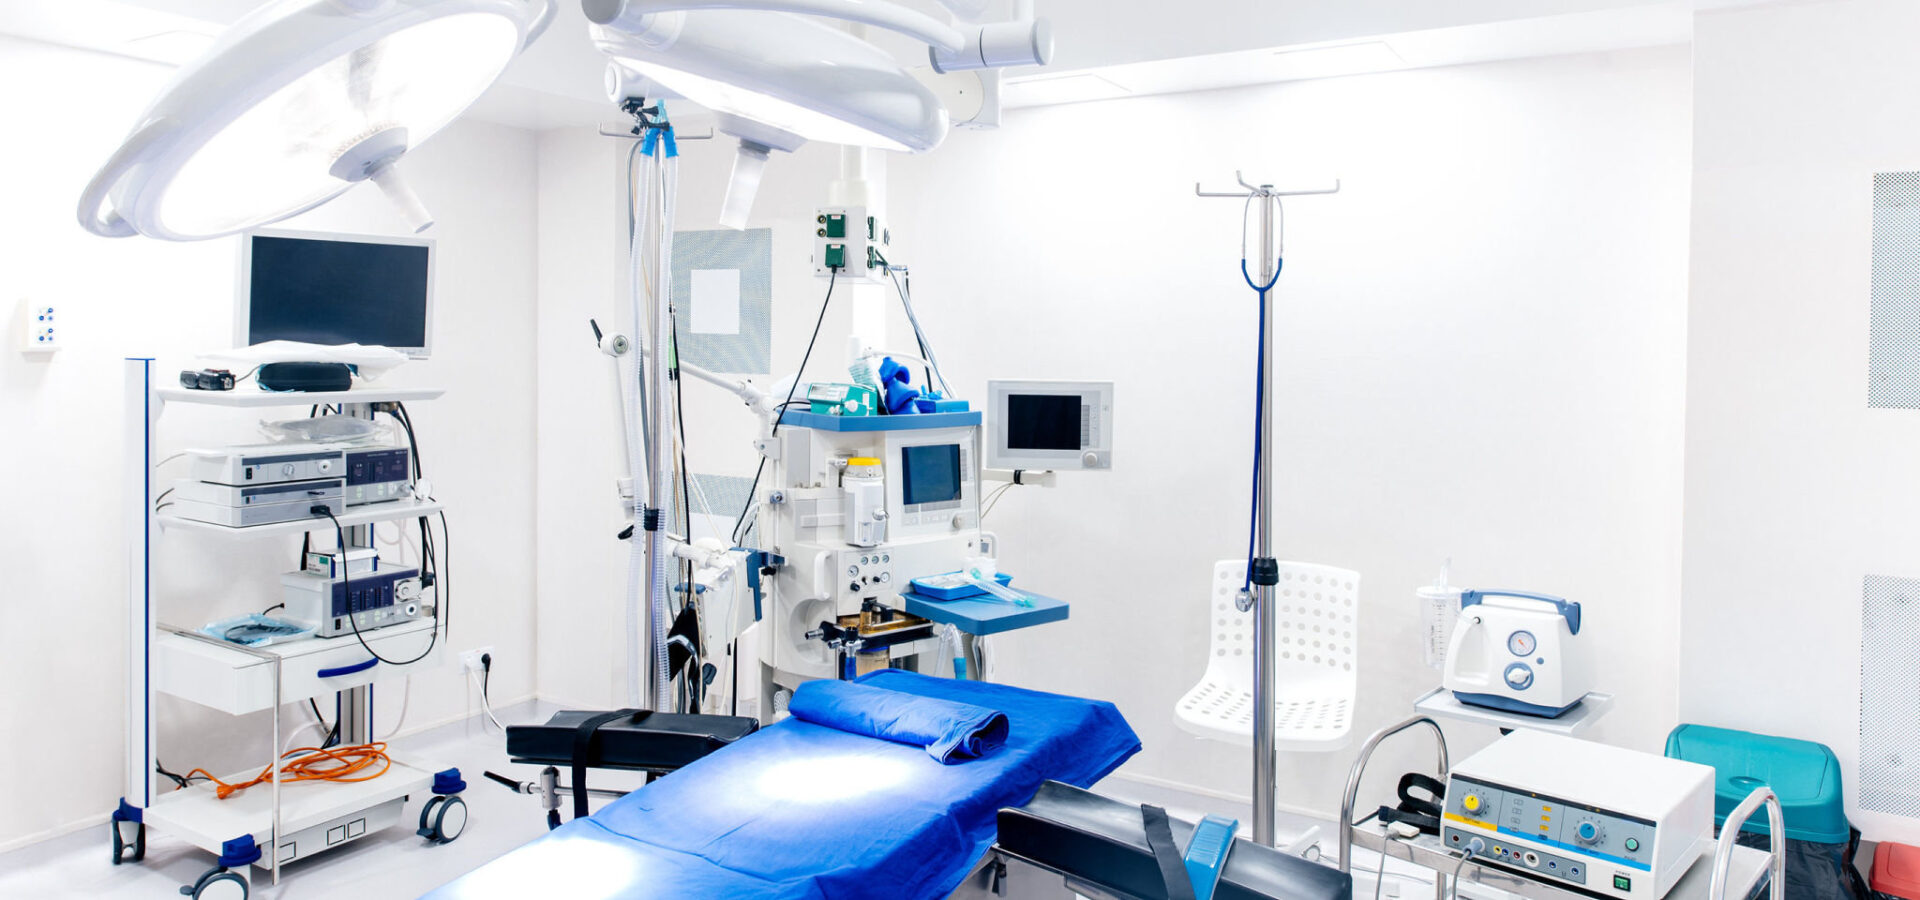 Medical devices and industrial lamps in surgery room of modern hospital. Interior hospital design concept